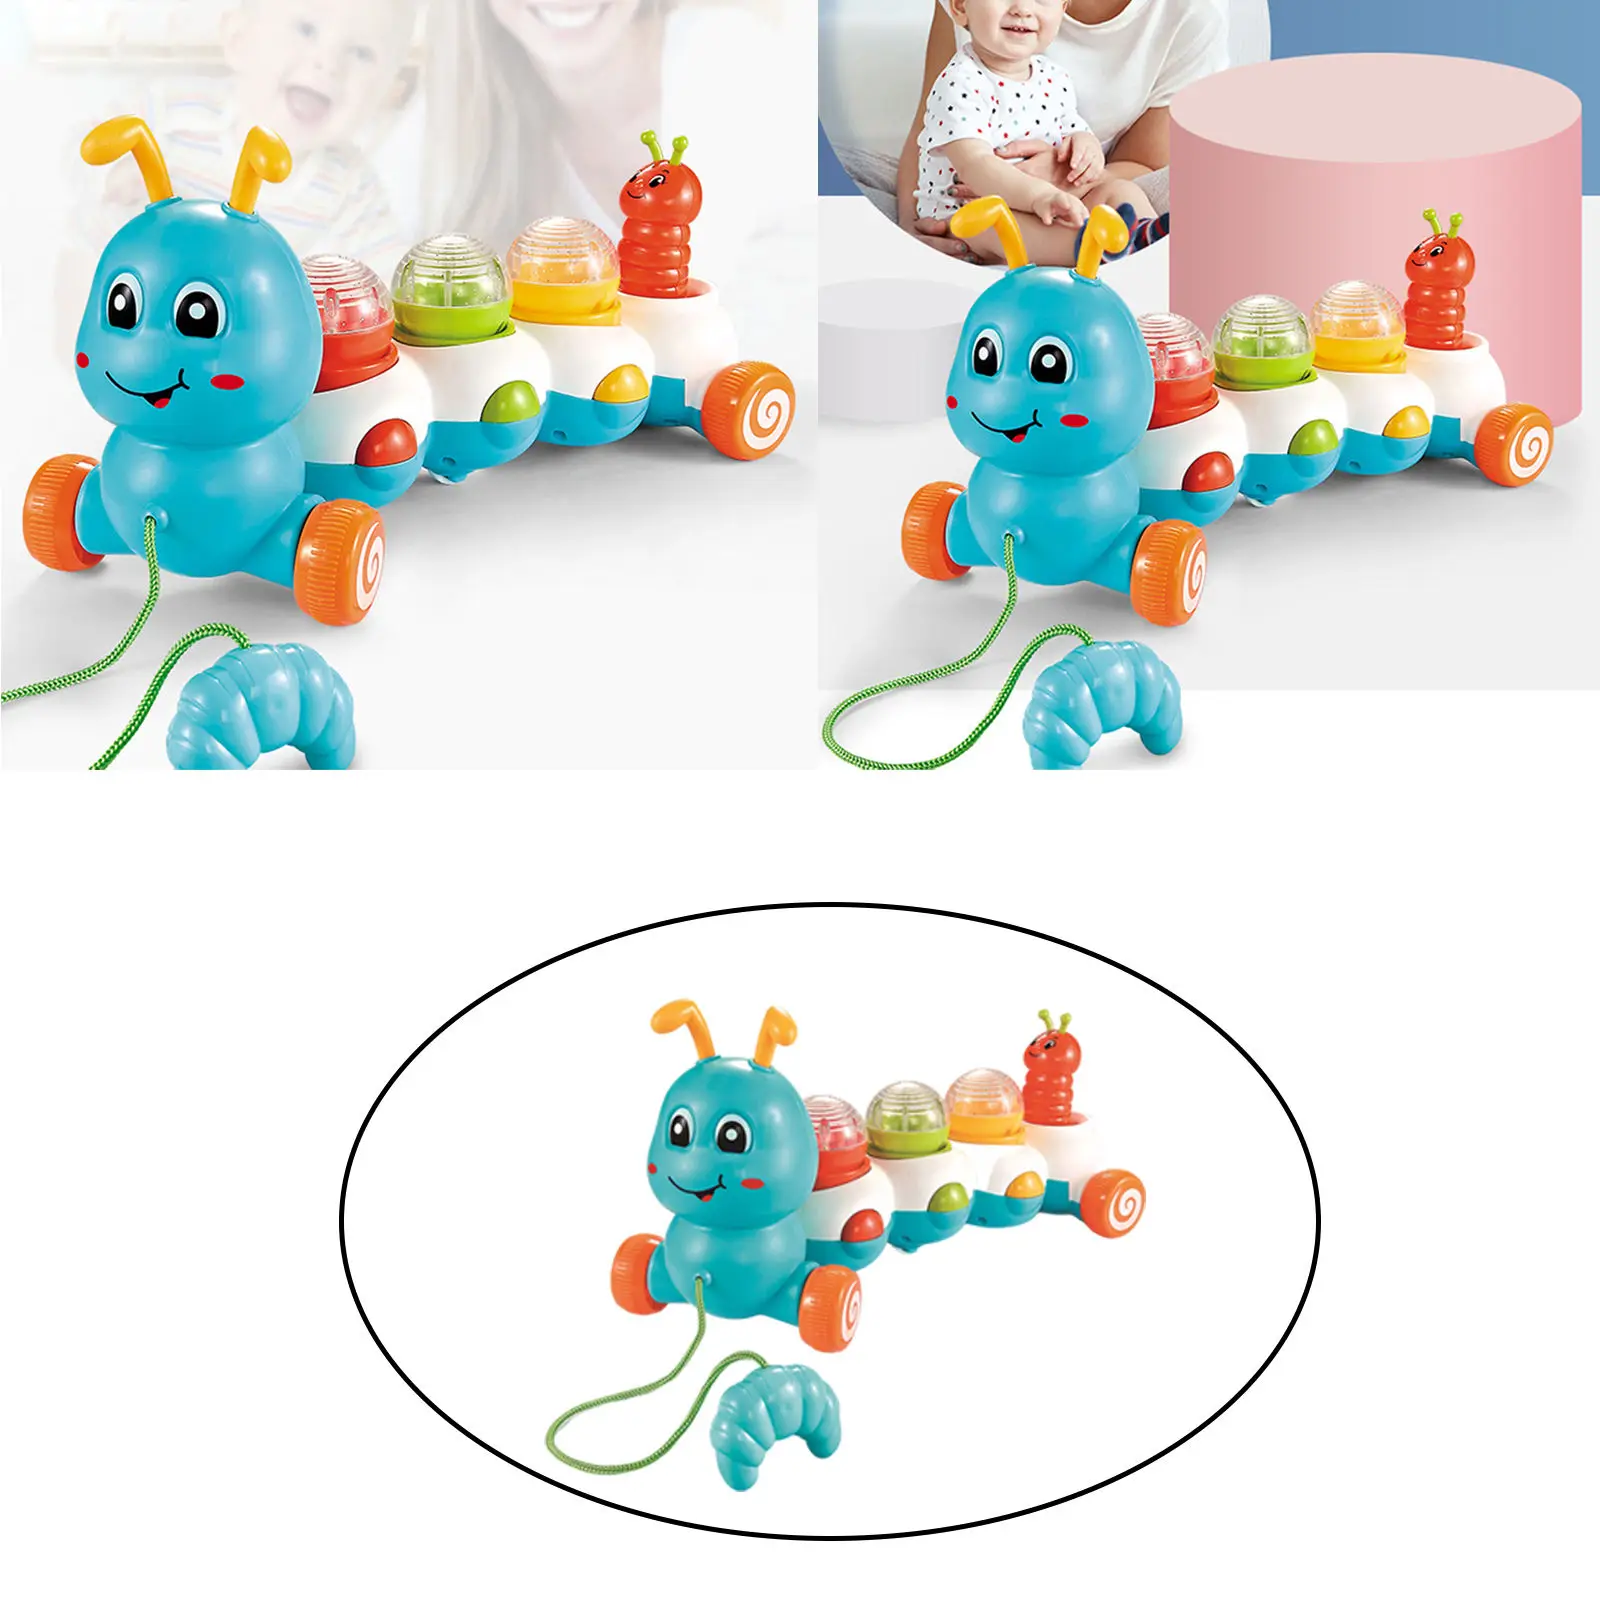 Electric Animal Caterpillar Kids Toy With Lights and Sound for Children Funny Novelty Gift Early Learning Toys